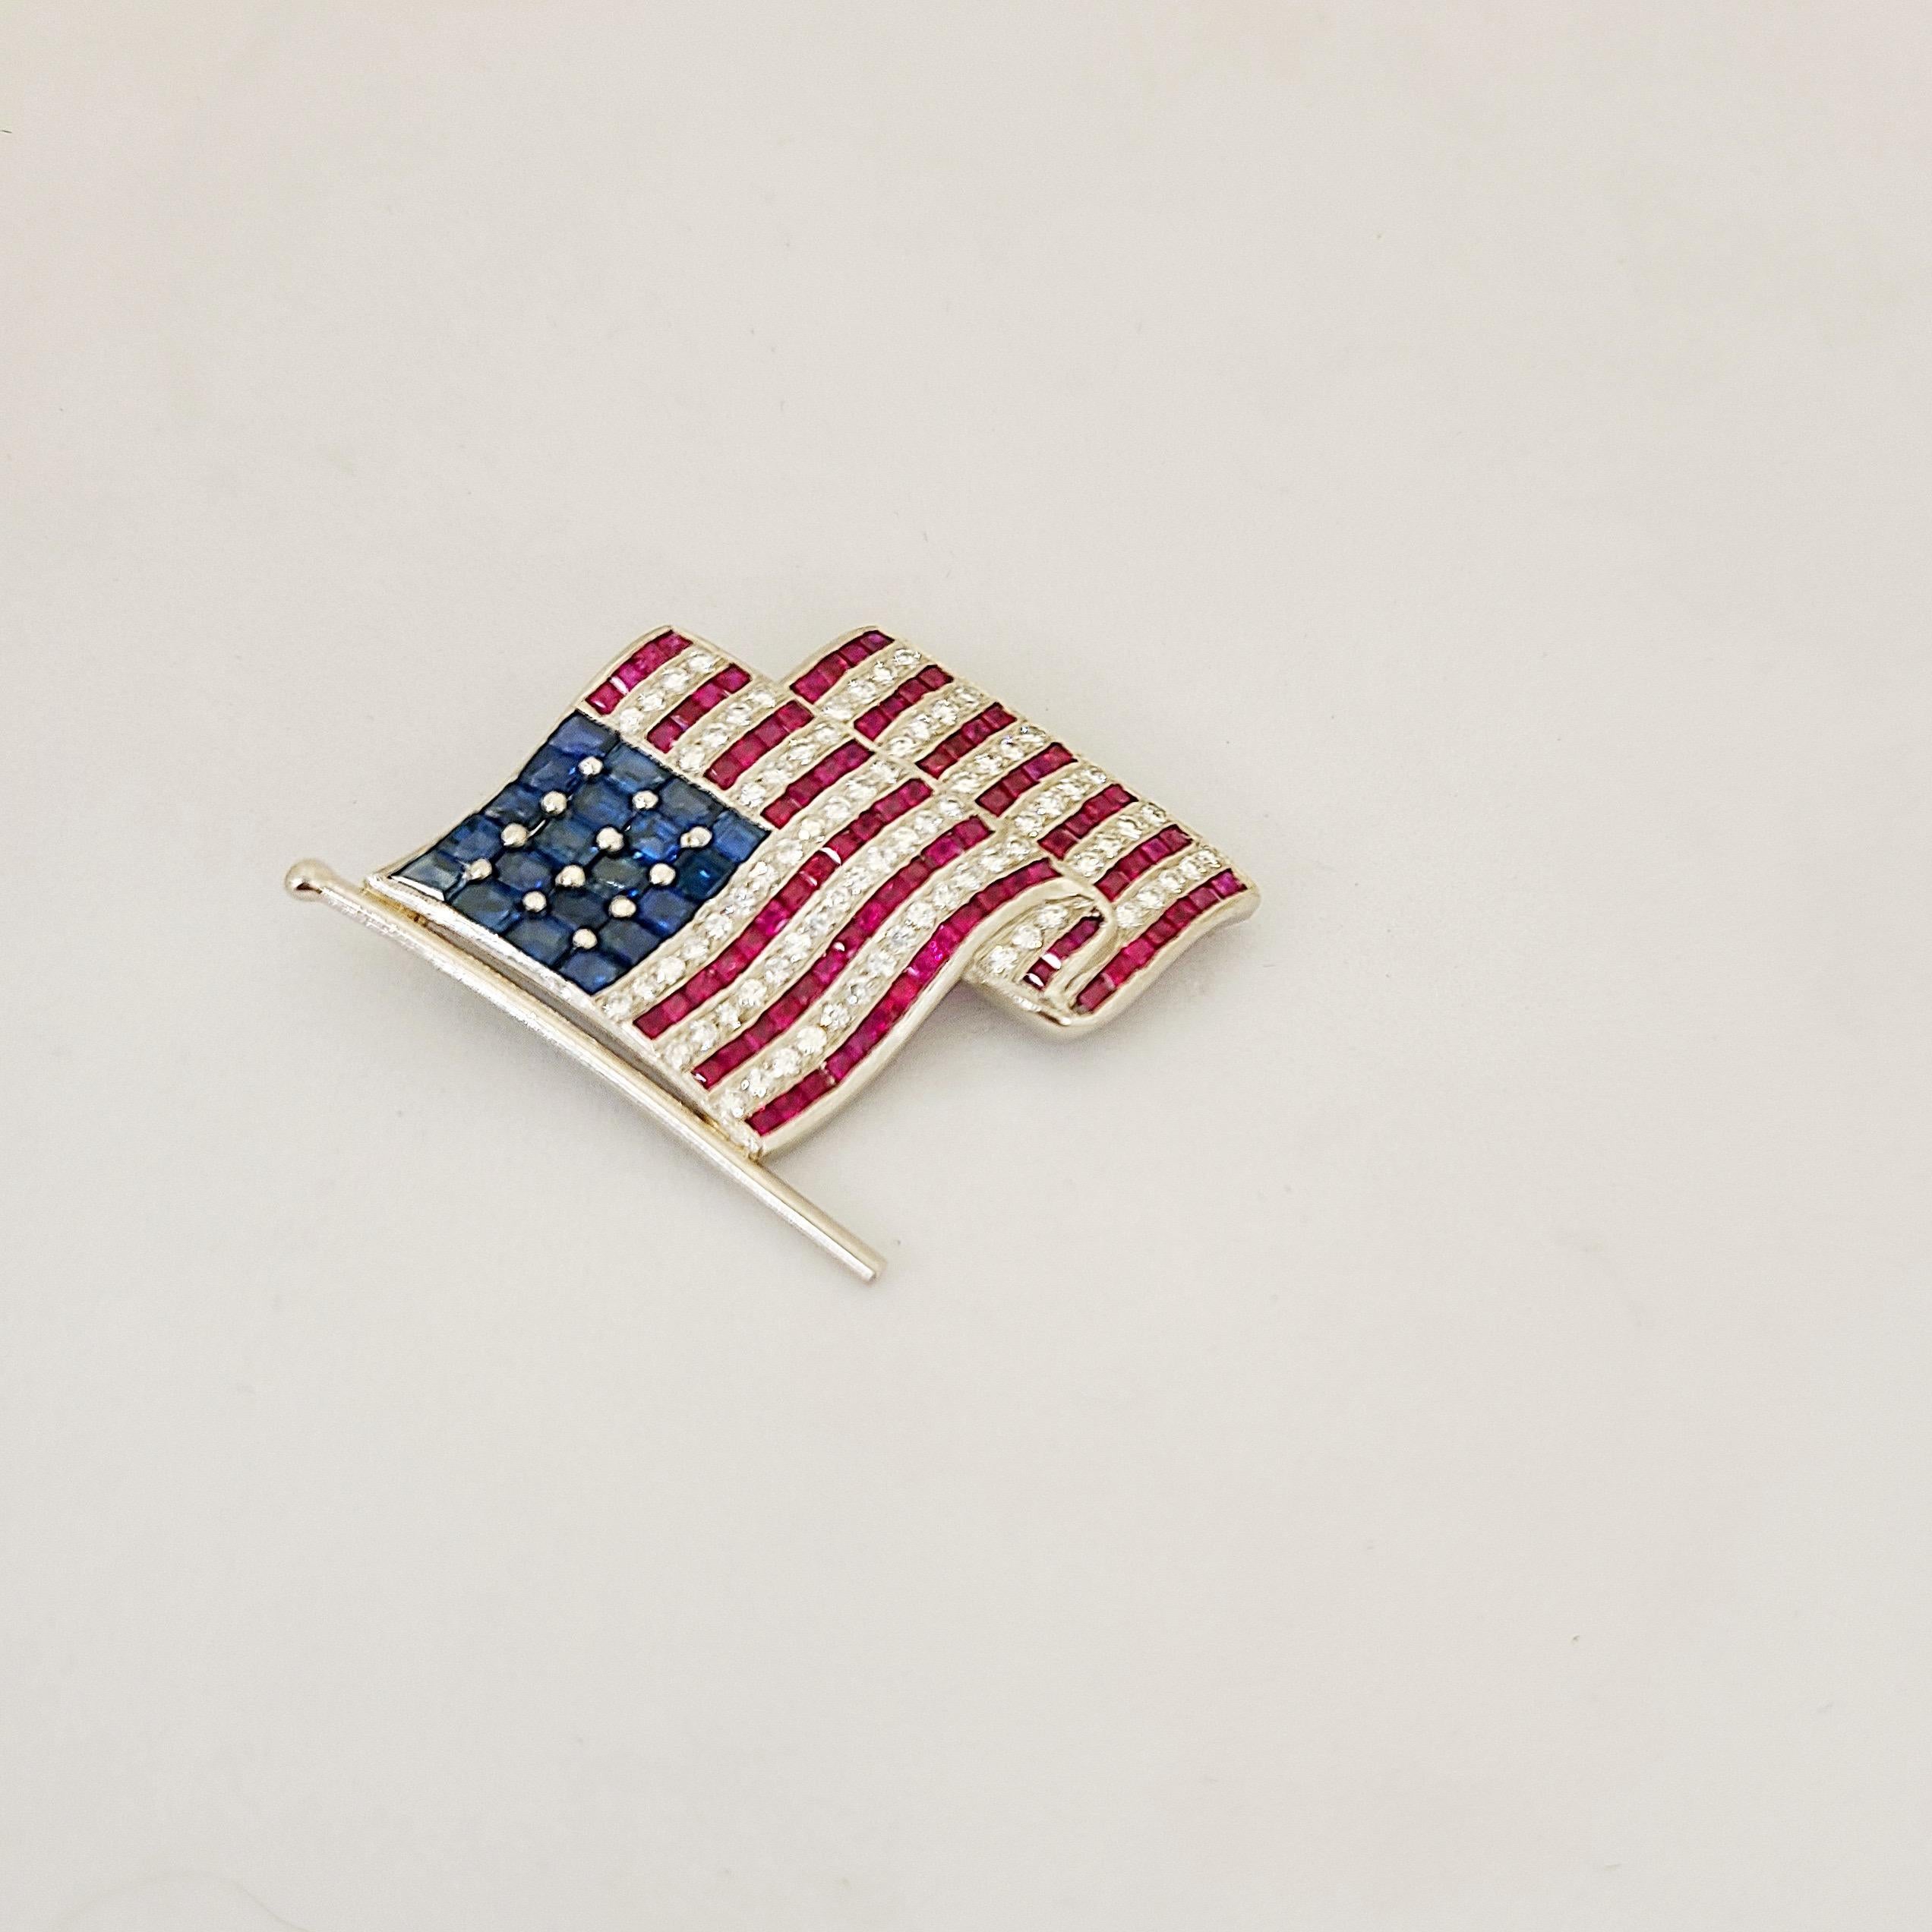 The perfect brooch for 2020.
Our American flag brooch set with round brilliant diamonds and square cut rubies and sapphires. the brooch measures approximately 1